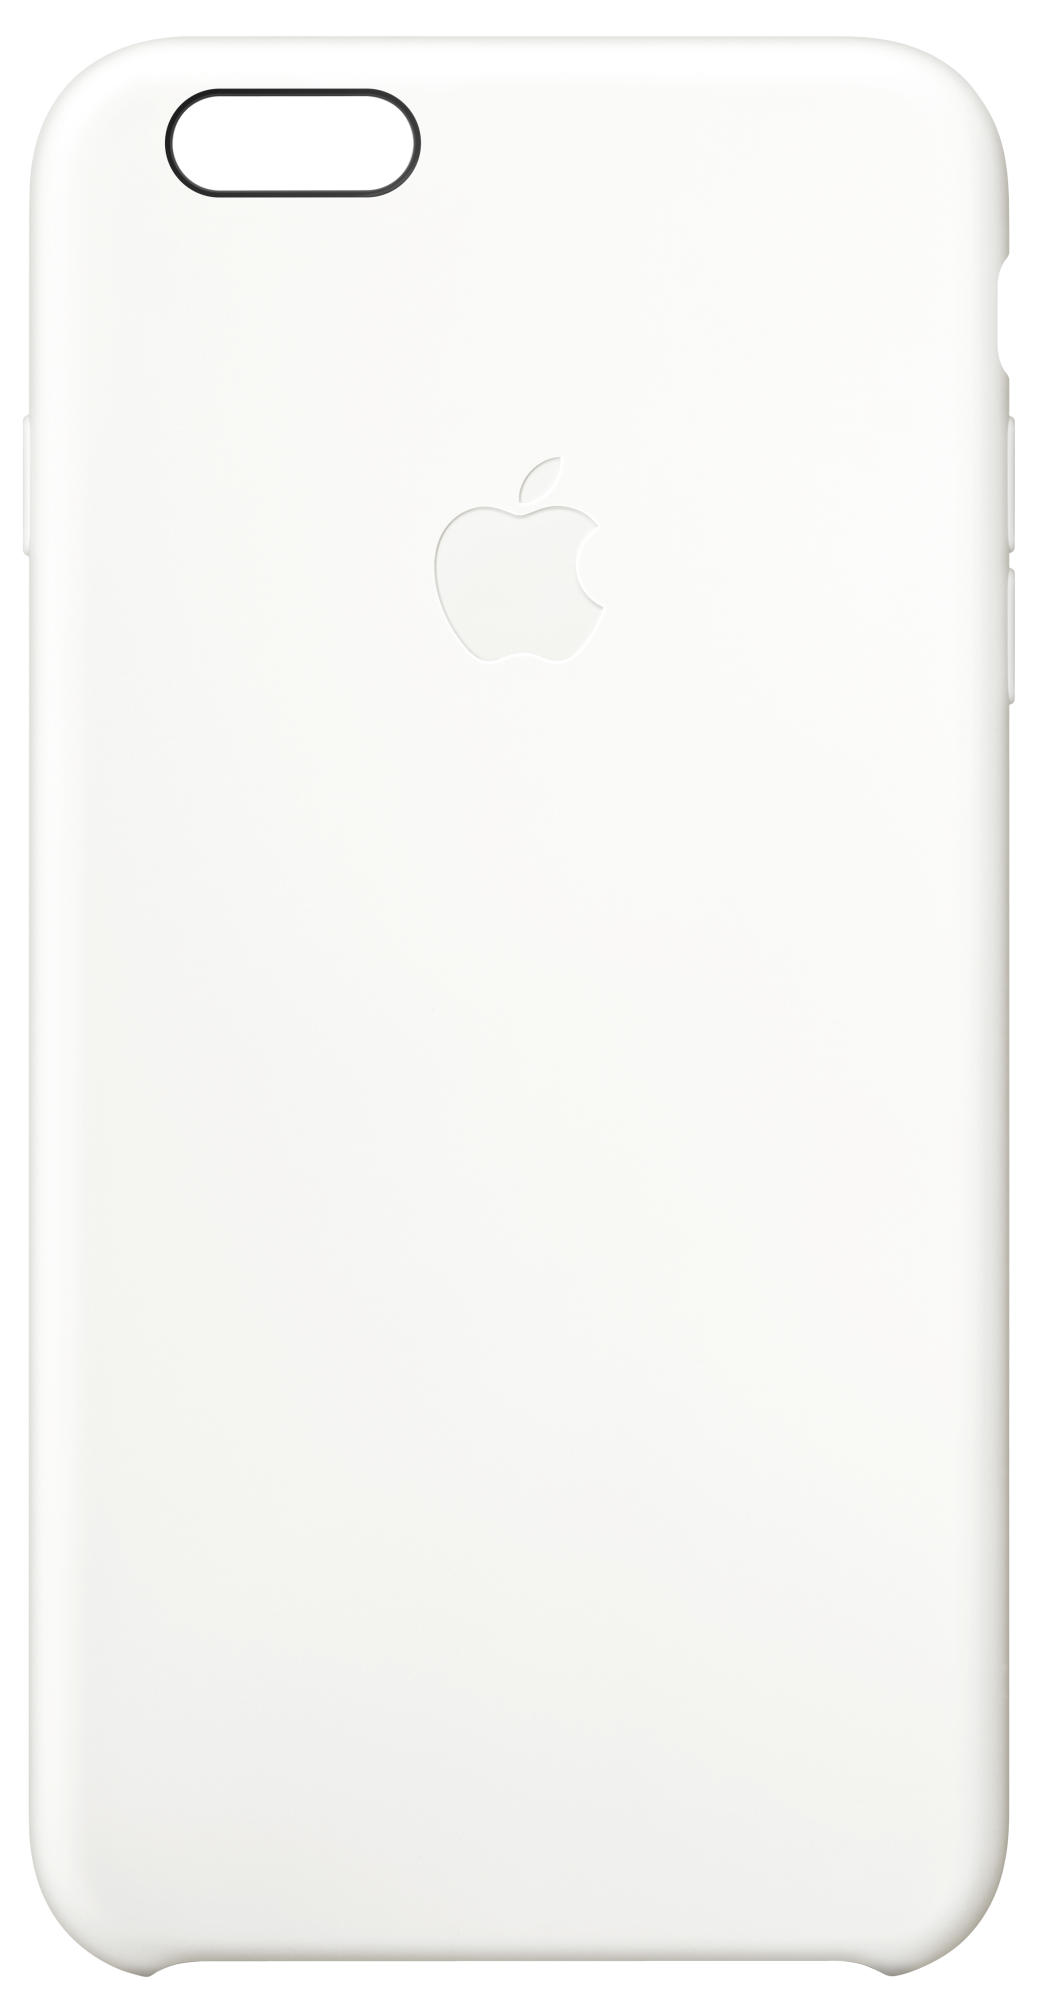 Backcover, APPLE iPhone Weiß Plus, Apple, 6 MGRF2ZM/A,